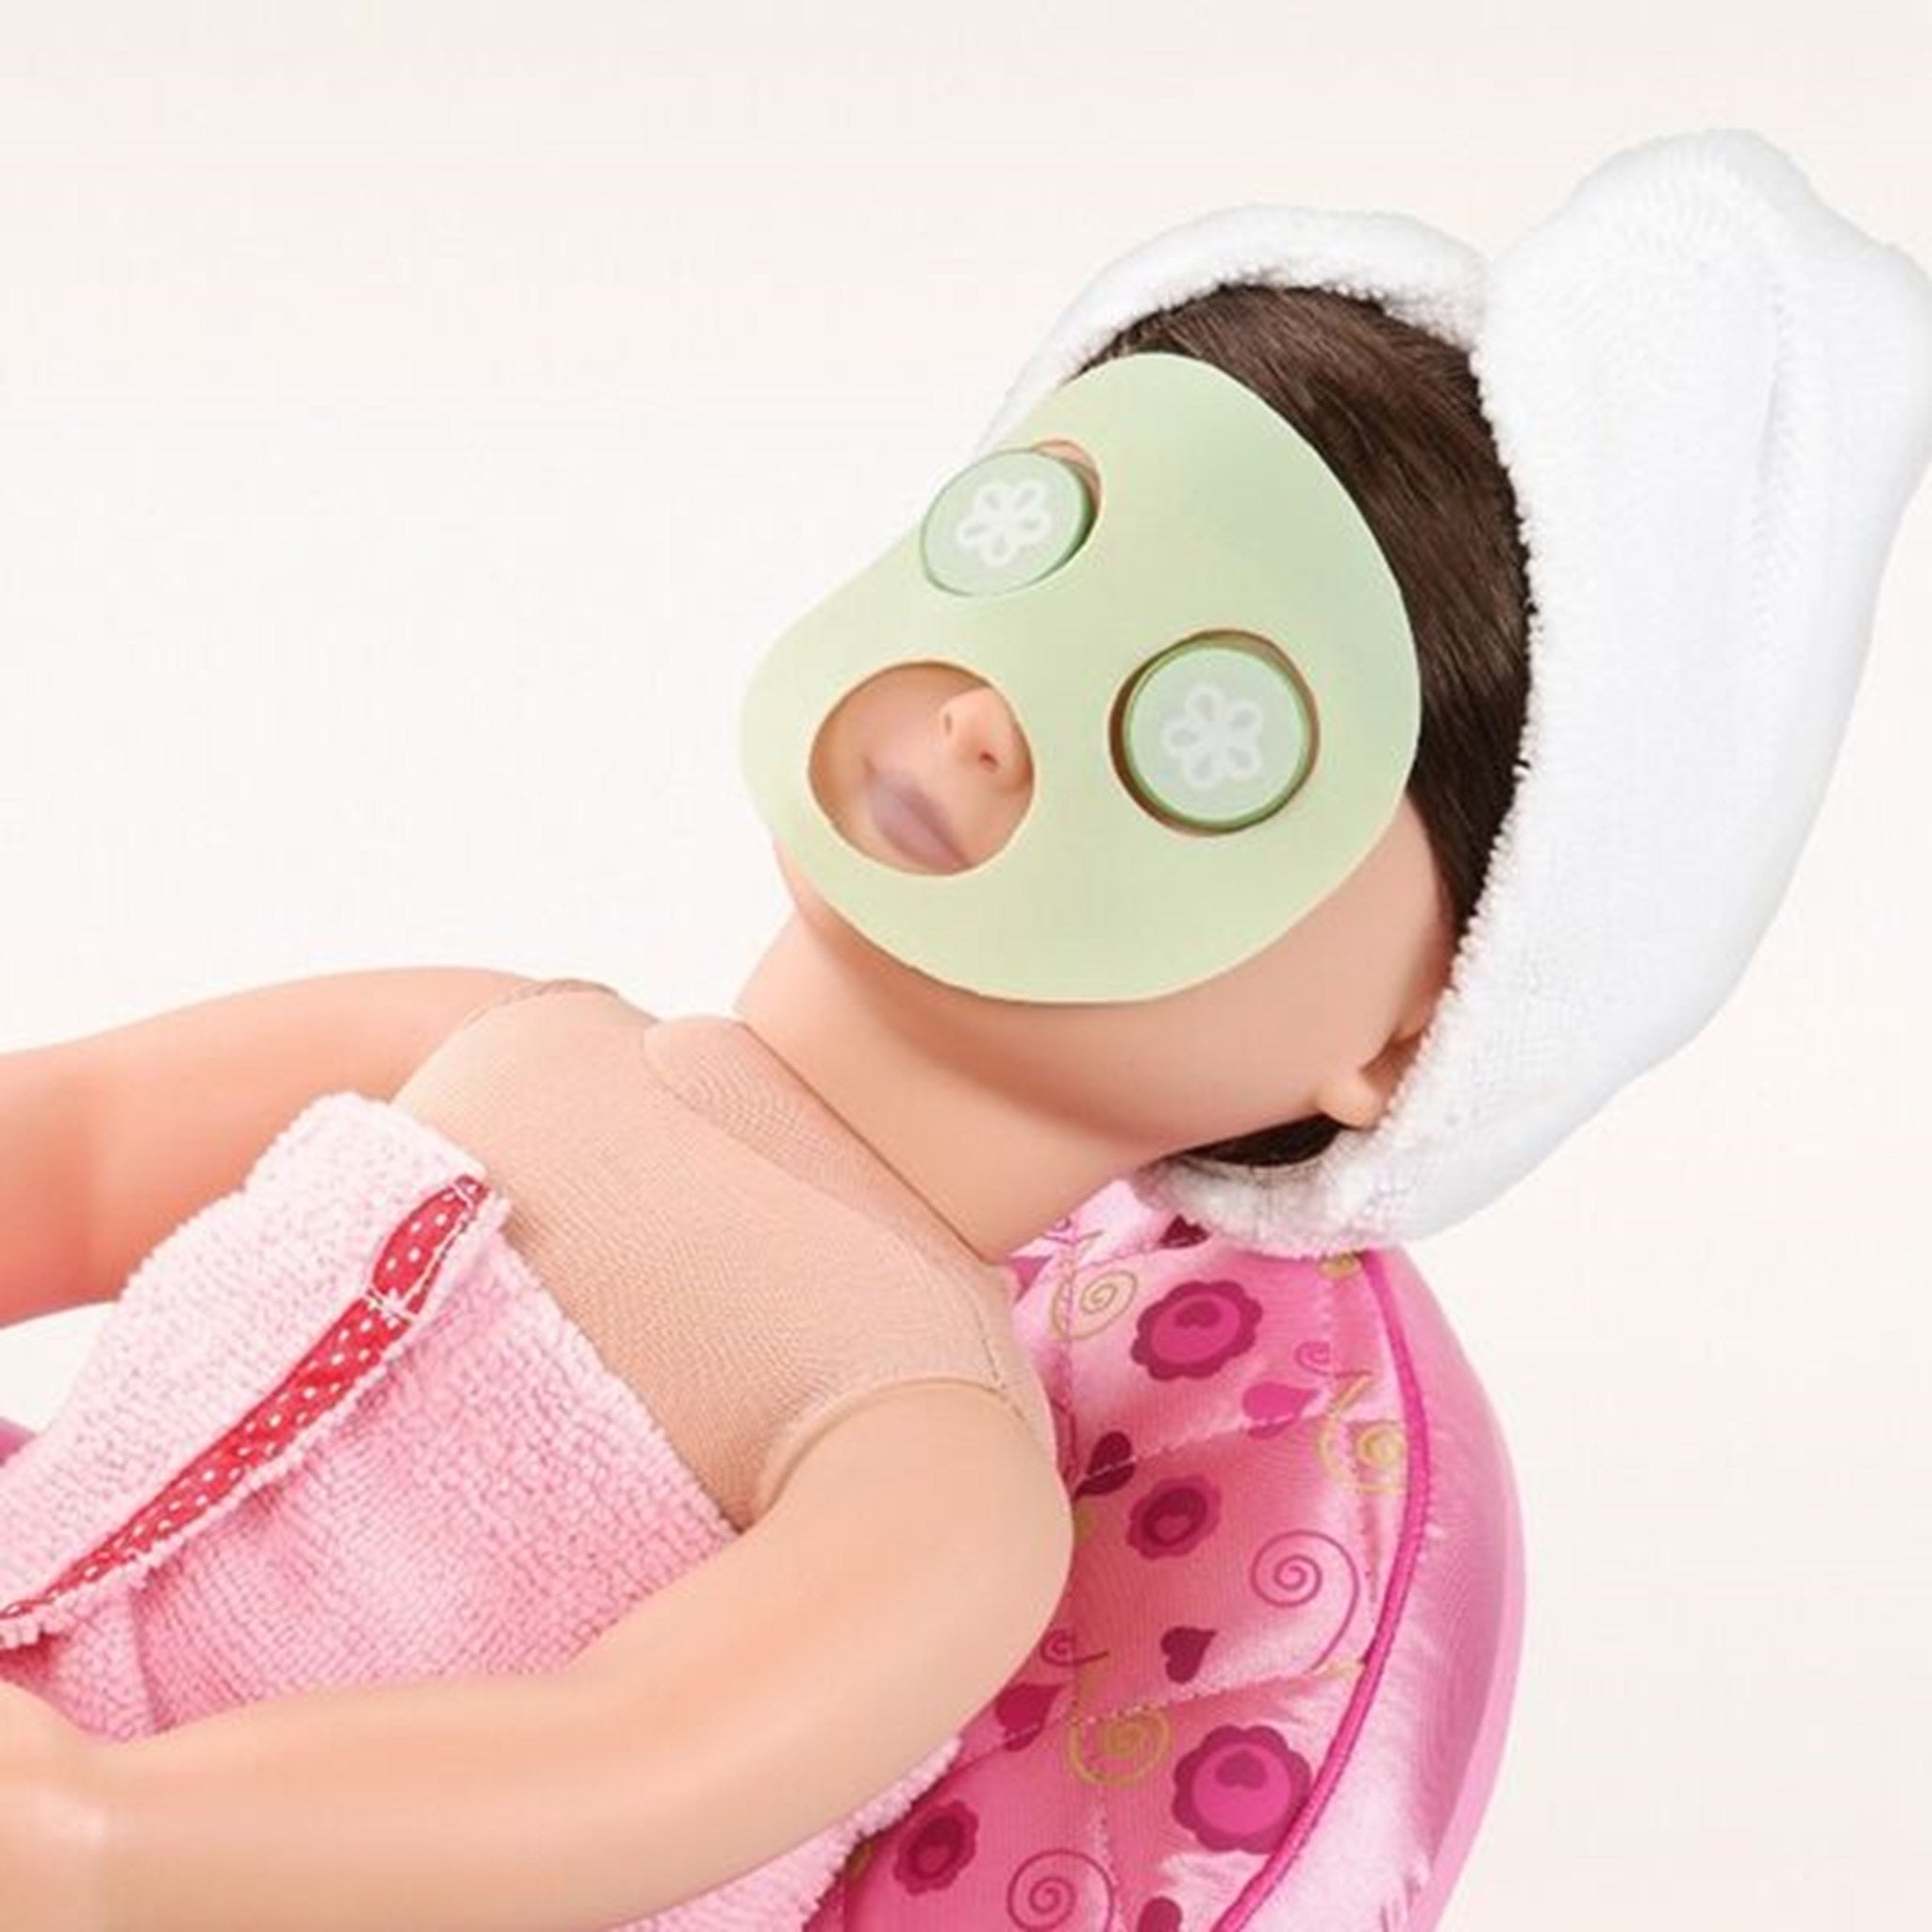 Our Generation Doll Accessories - Spa Set 2